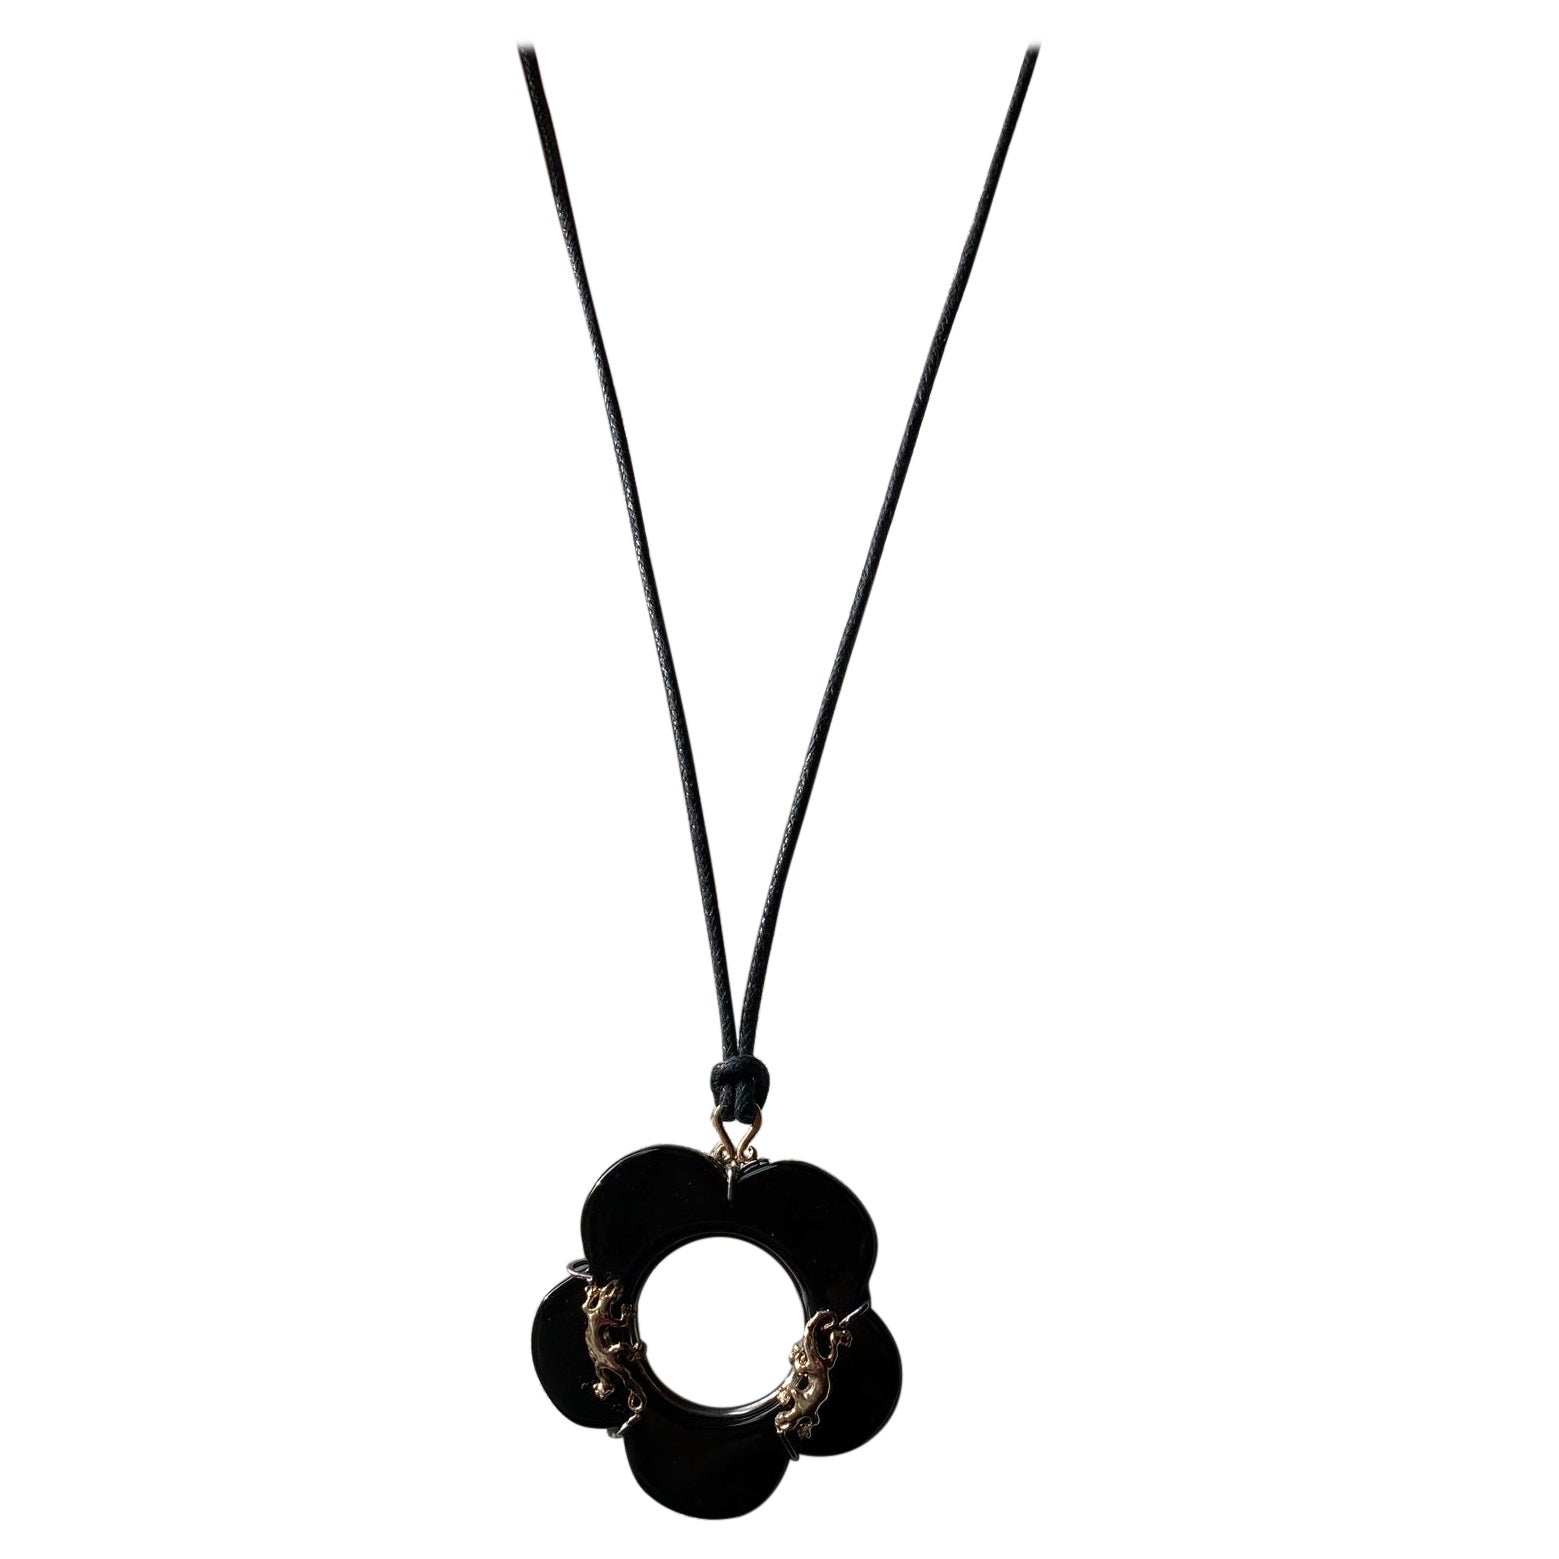 Onyx Flower Necklace Pendent 24 karat Gold Plated Silver Sterling Rope Necklace